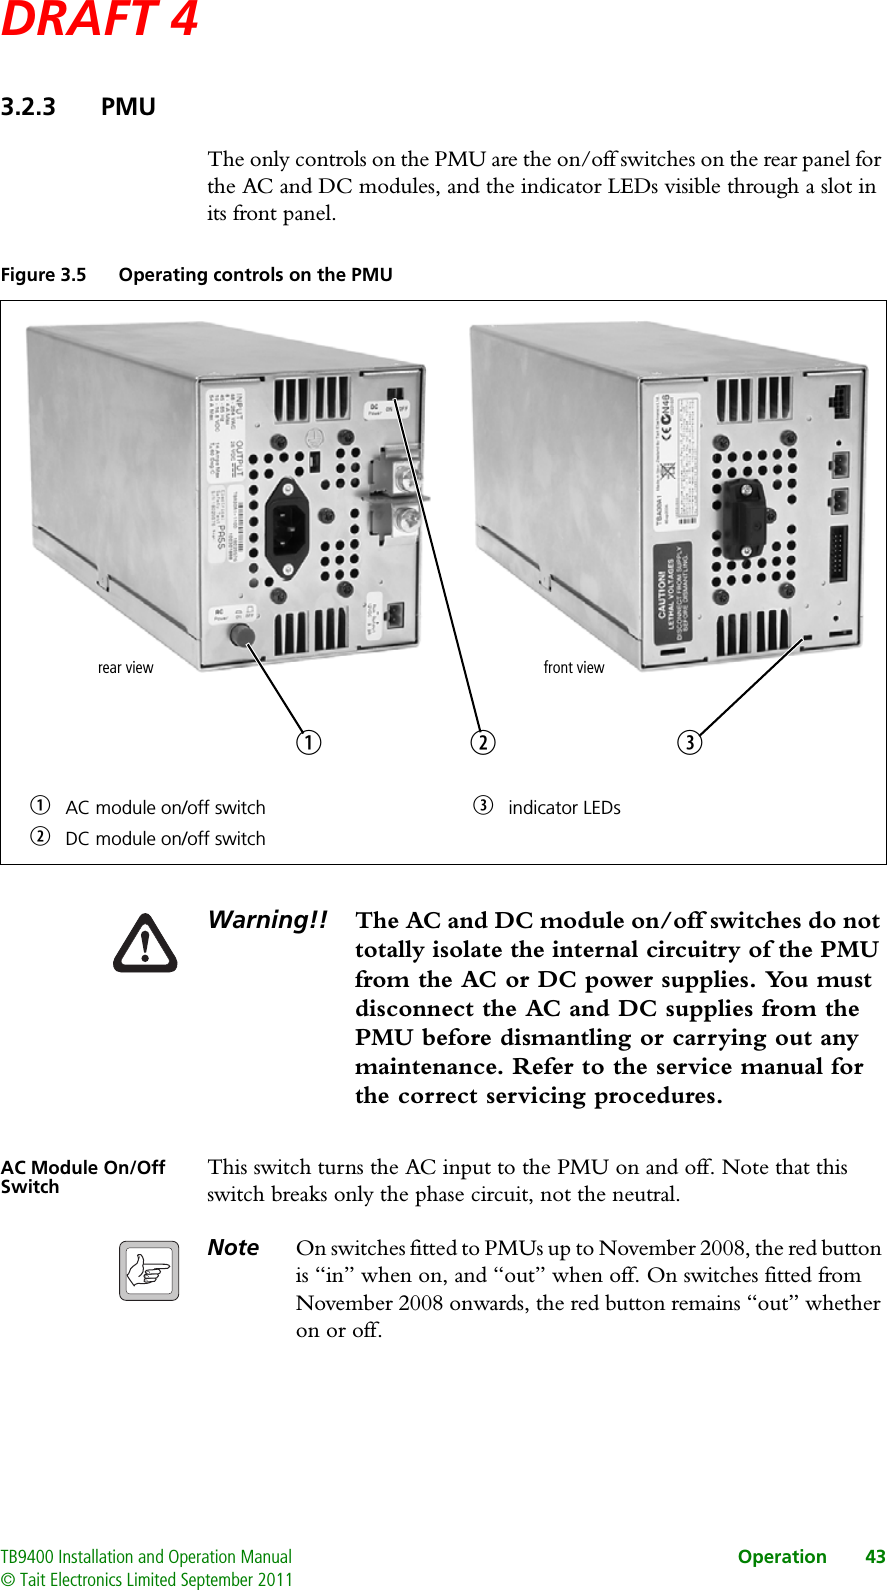 DRAFT 4 TB9400 Installation and Operation Manual Operation 43© Tait Electronics Limited September 20113.2.3 PMUThe only controls on the PMU are the on/off switches on the rear panel for the AC and DC modules, and the indicator LEDs visible through a slot in its front panel.Warning!! The AC and DC module on/off switches do not totally isolate the internal circuitry of the PMU from the AC or DC power supplies. You must disconnect the AC and DC supplies from the PMU before dismantling or carrying out any maintenance. Refer to the service manual for the correct servicing procedures.AC Module On/Off Switch This switch turns the AC input to the PMU on and off. Note that this switch breaks only the phase circuit, not the neutral.Note On switches fitted to PMUs up to November 2008, the red button is “in” when on, and “out” when off. On switches fitted from November 2008 onwards, the red button remains “out” whether on or off.Figure 3.5 Operating controls on the PMUbAC module on/off switch dindicator LEDscDC module on/off switchbcrear viewdfront view